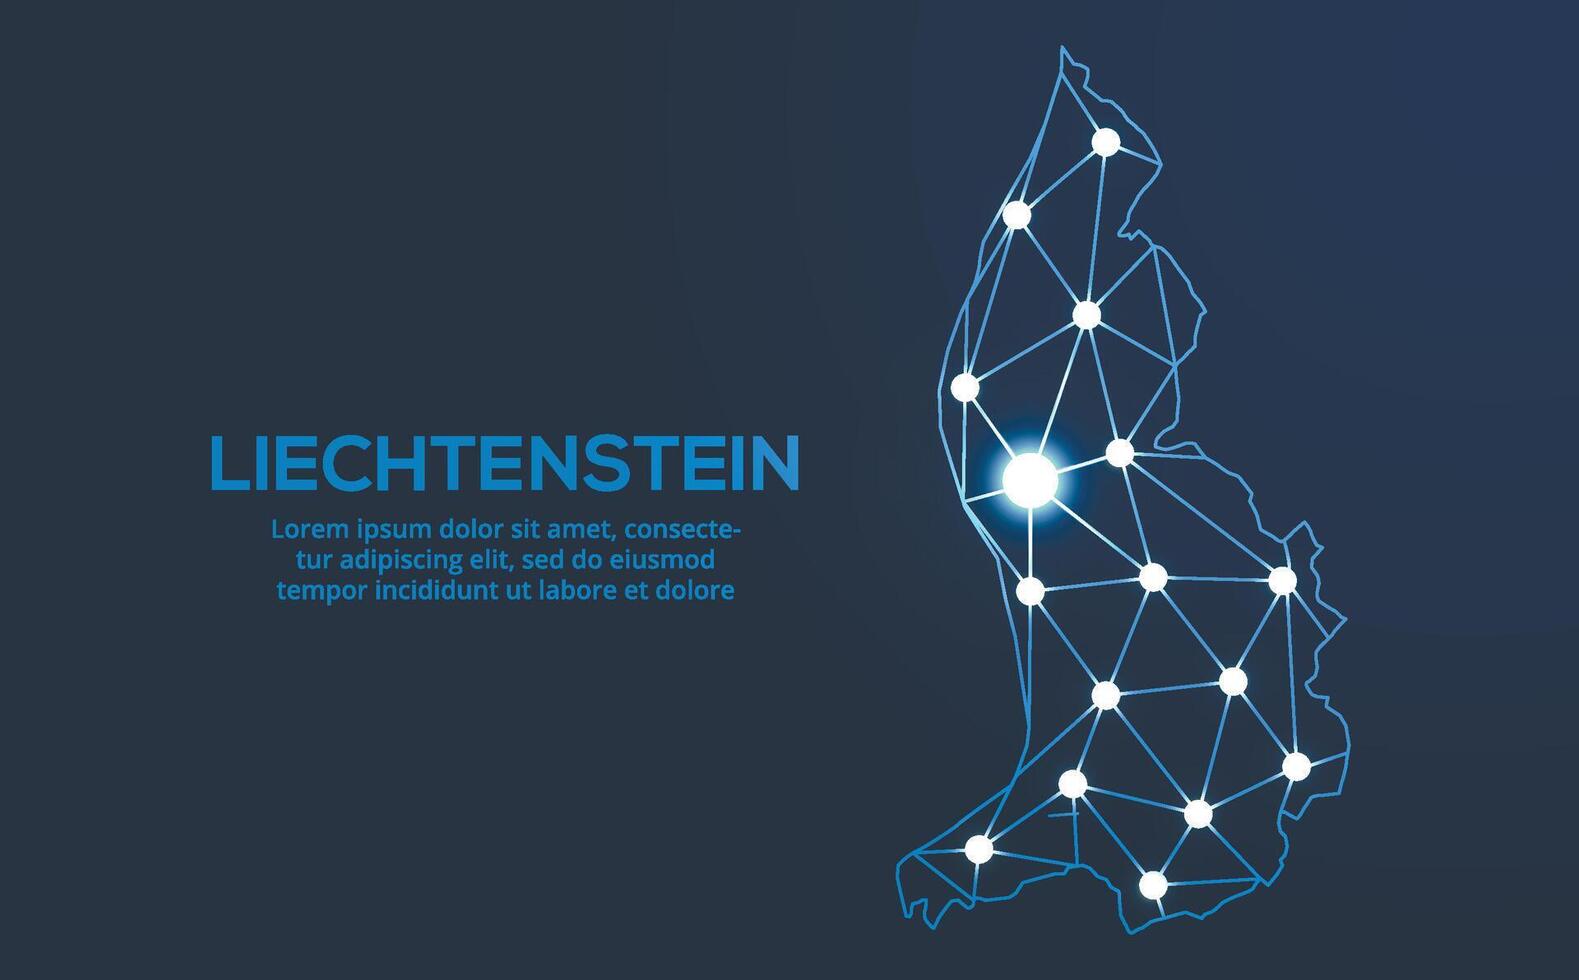 Liechtenstein communication network map. low poly image of a global map with lights in the form of cities. Map in the form of a constellation, mute and stars vector